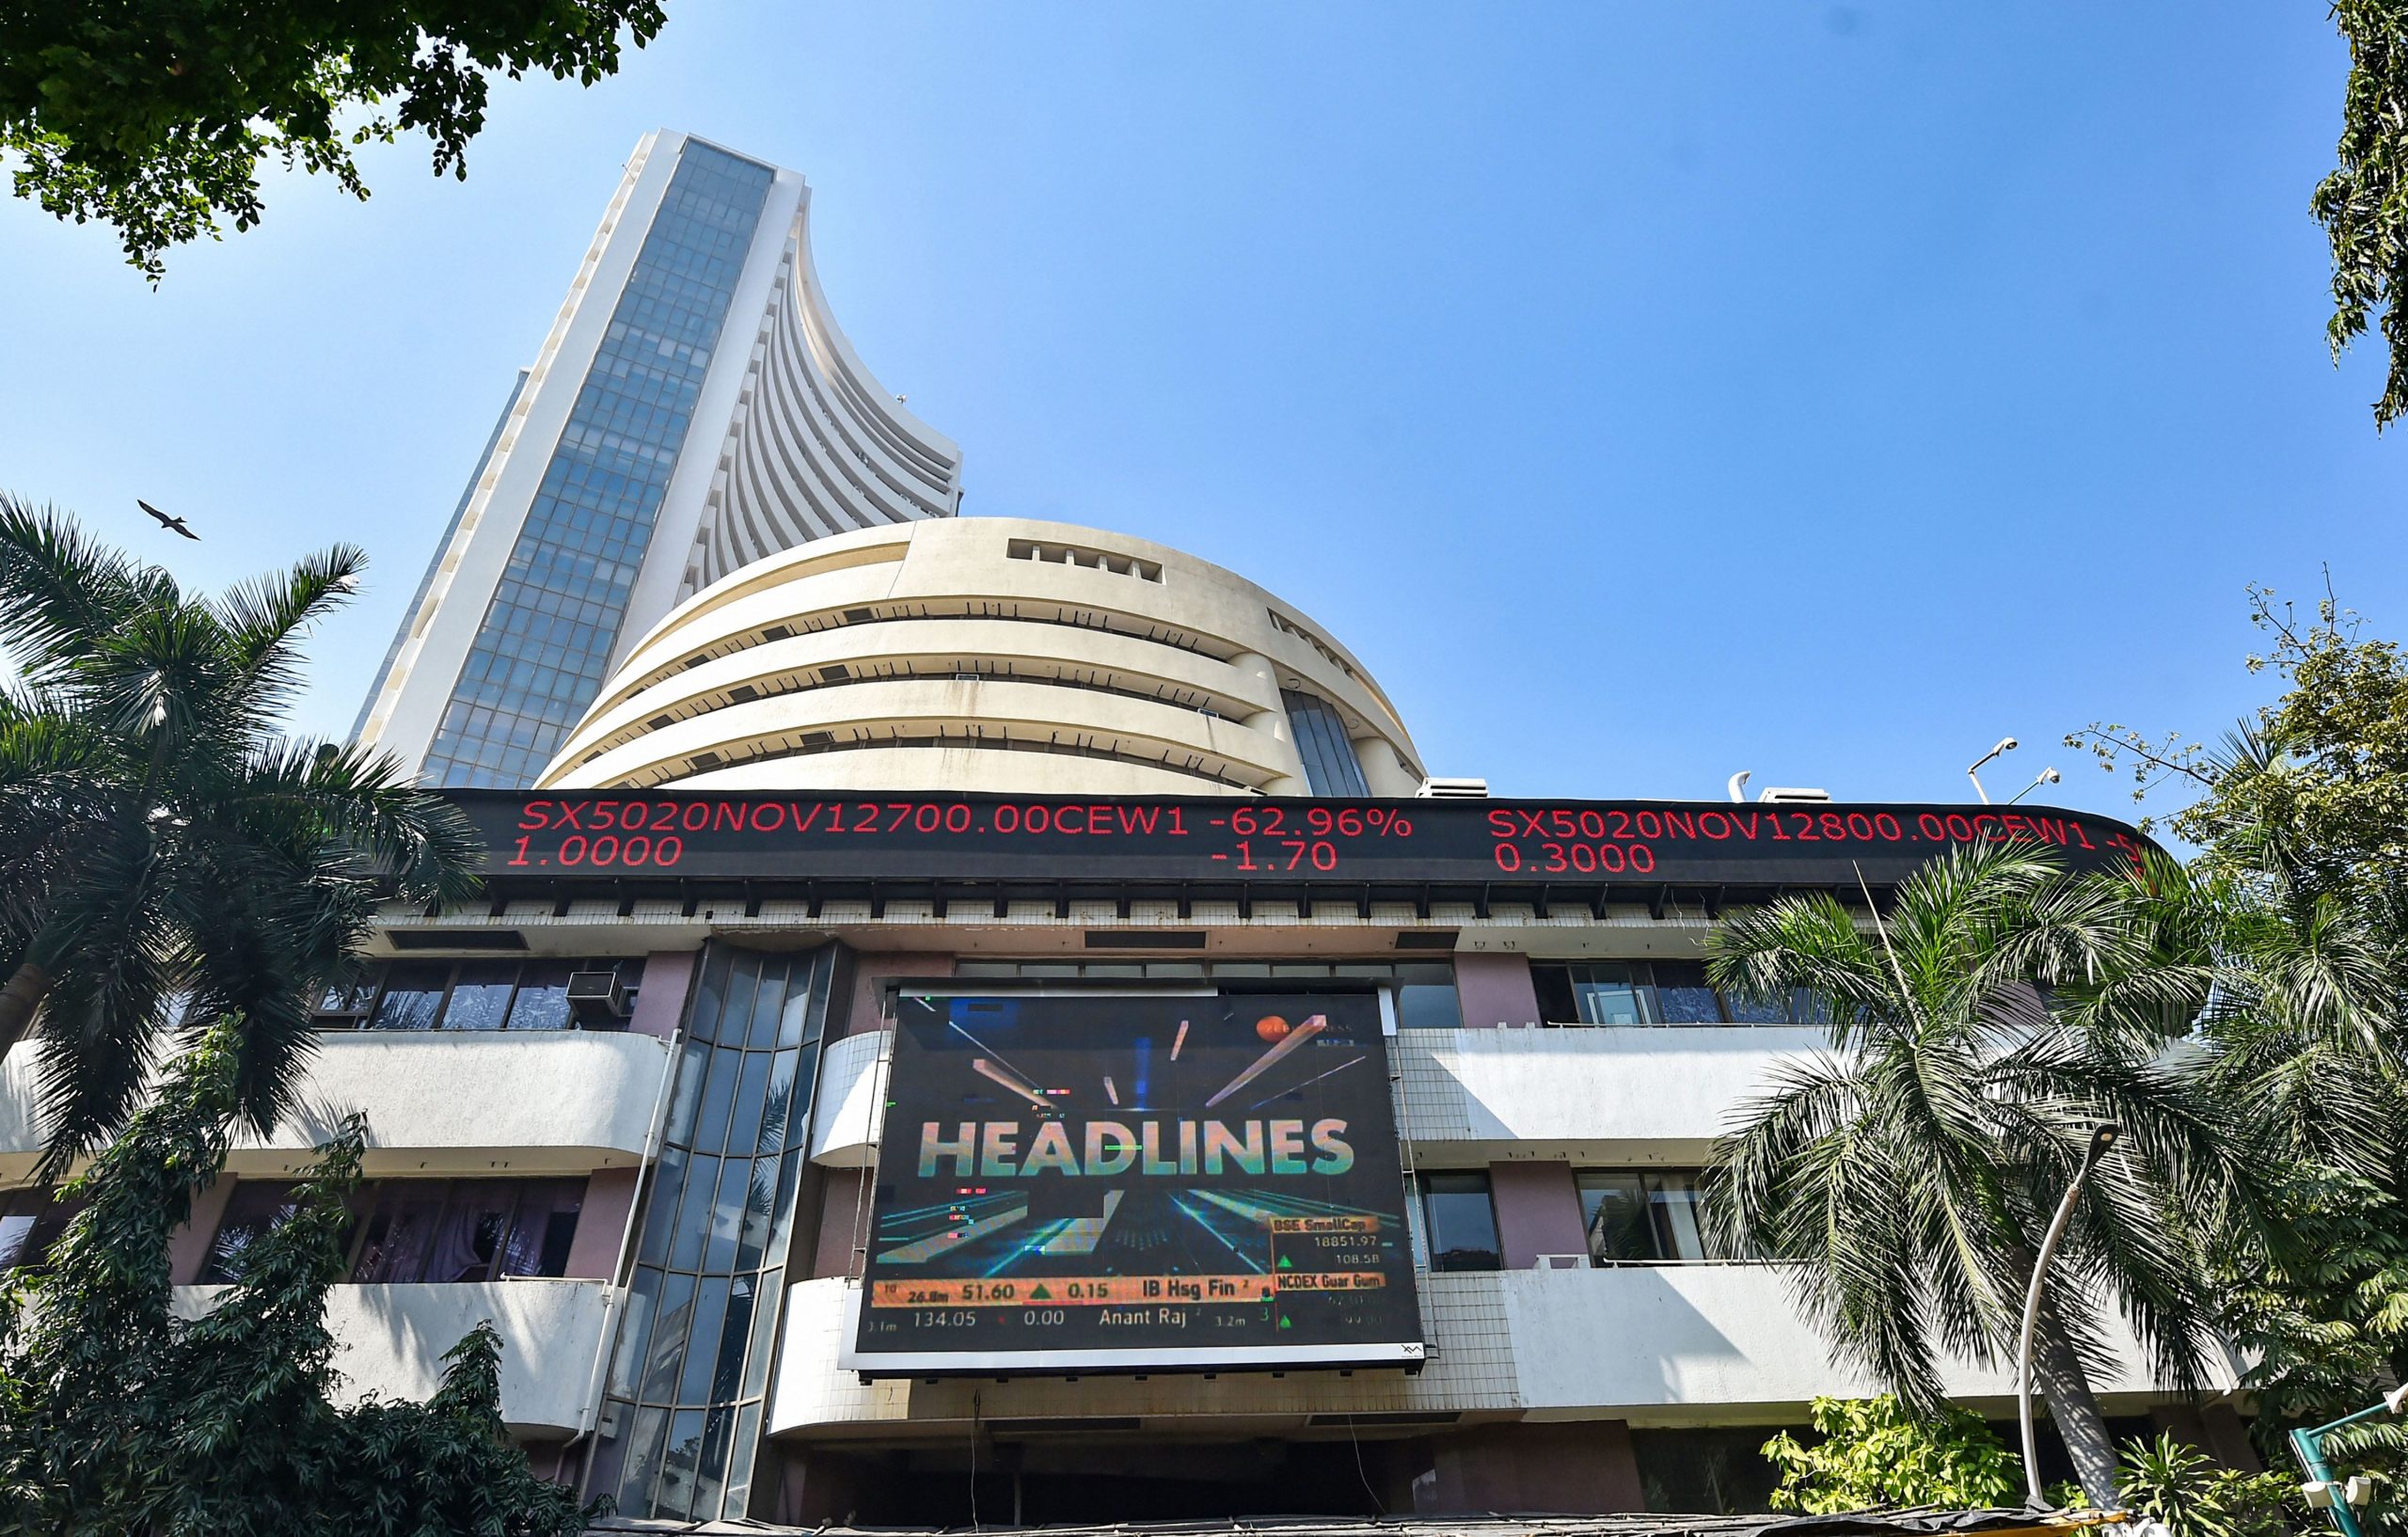 Trending Stocks: Ambuja Cements, M&M, Yes Bank and others in news today